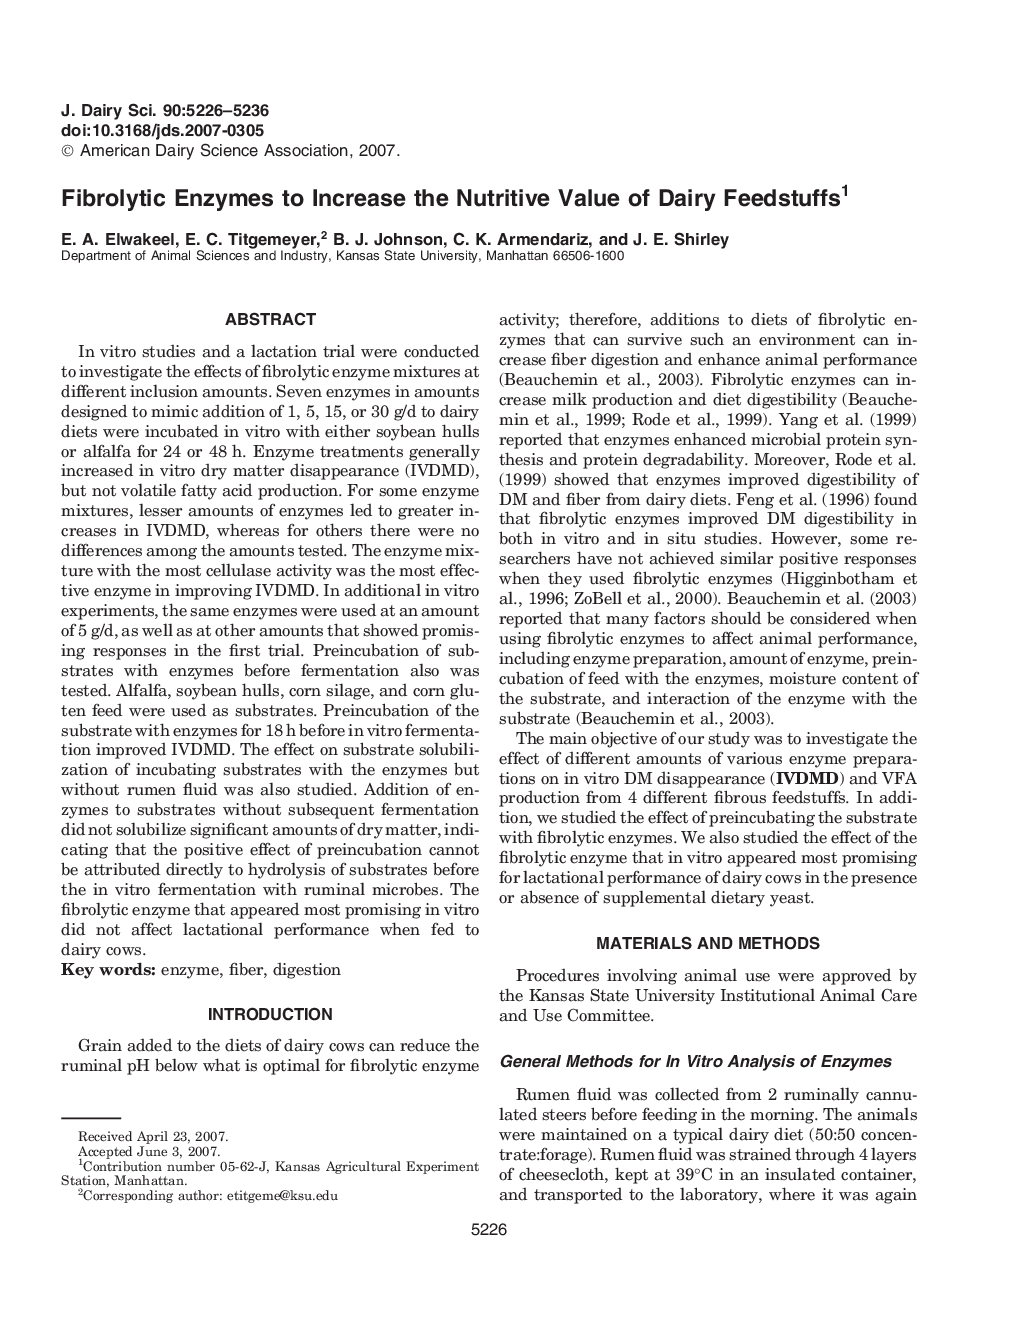 Fibrolytic Enzymes to Increase the Nutritive Value of Dairy Feedstuffs1